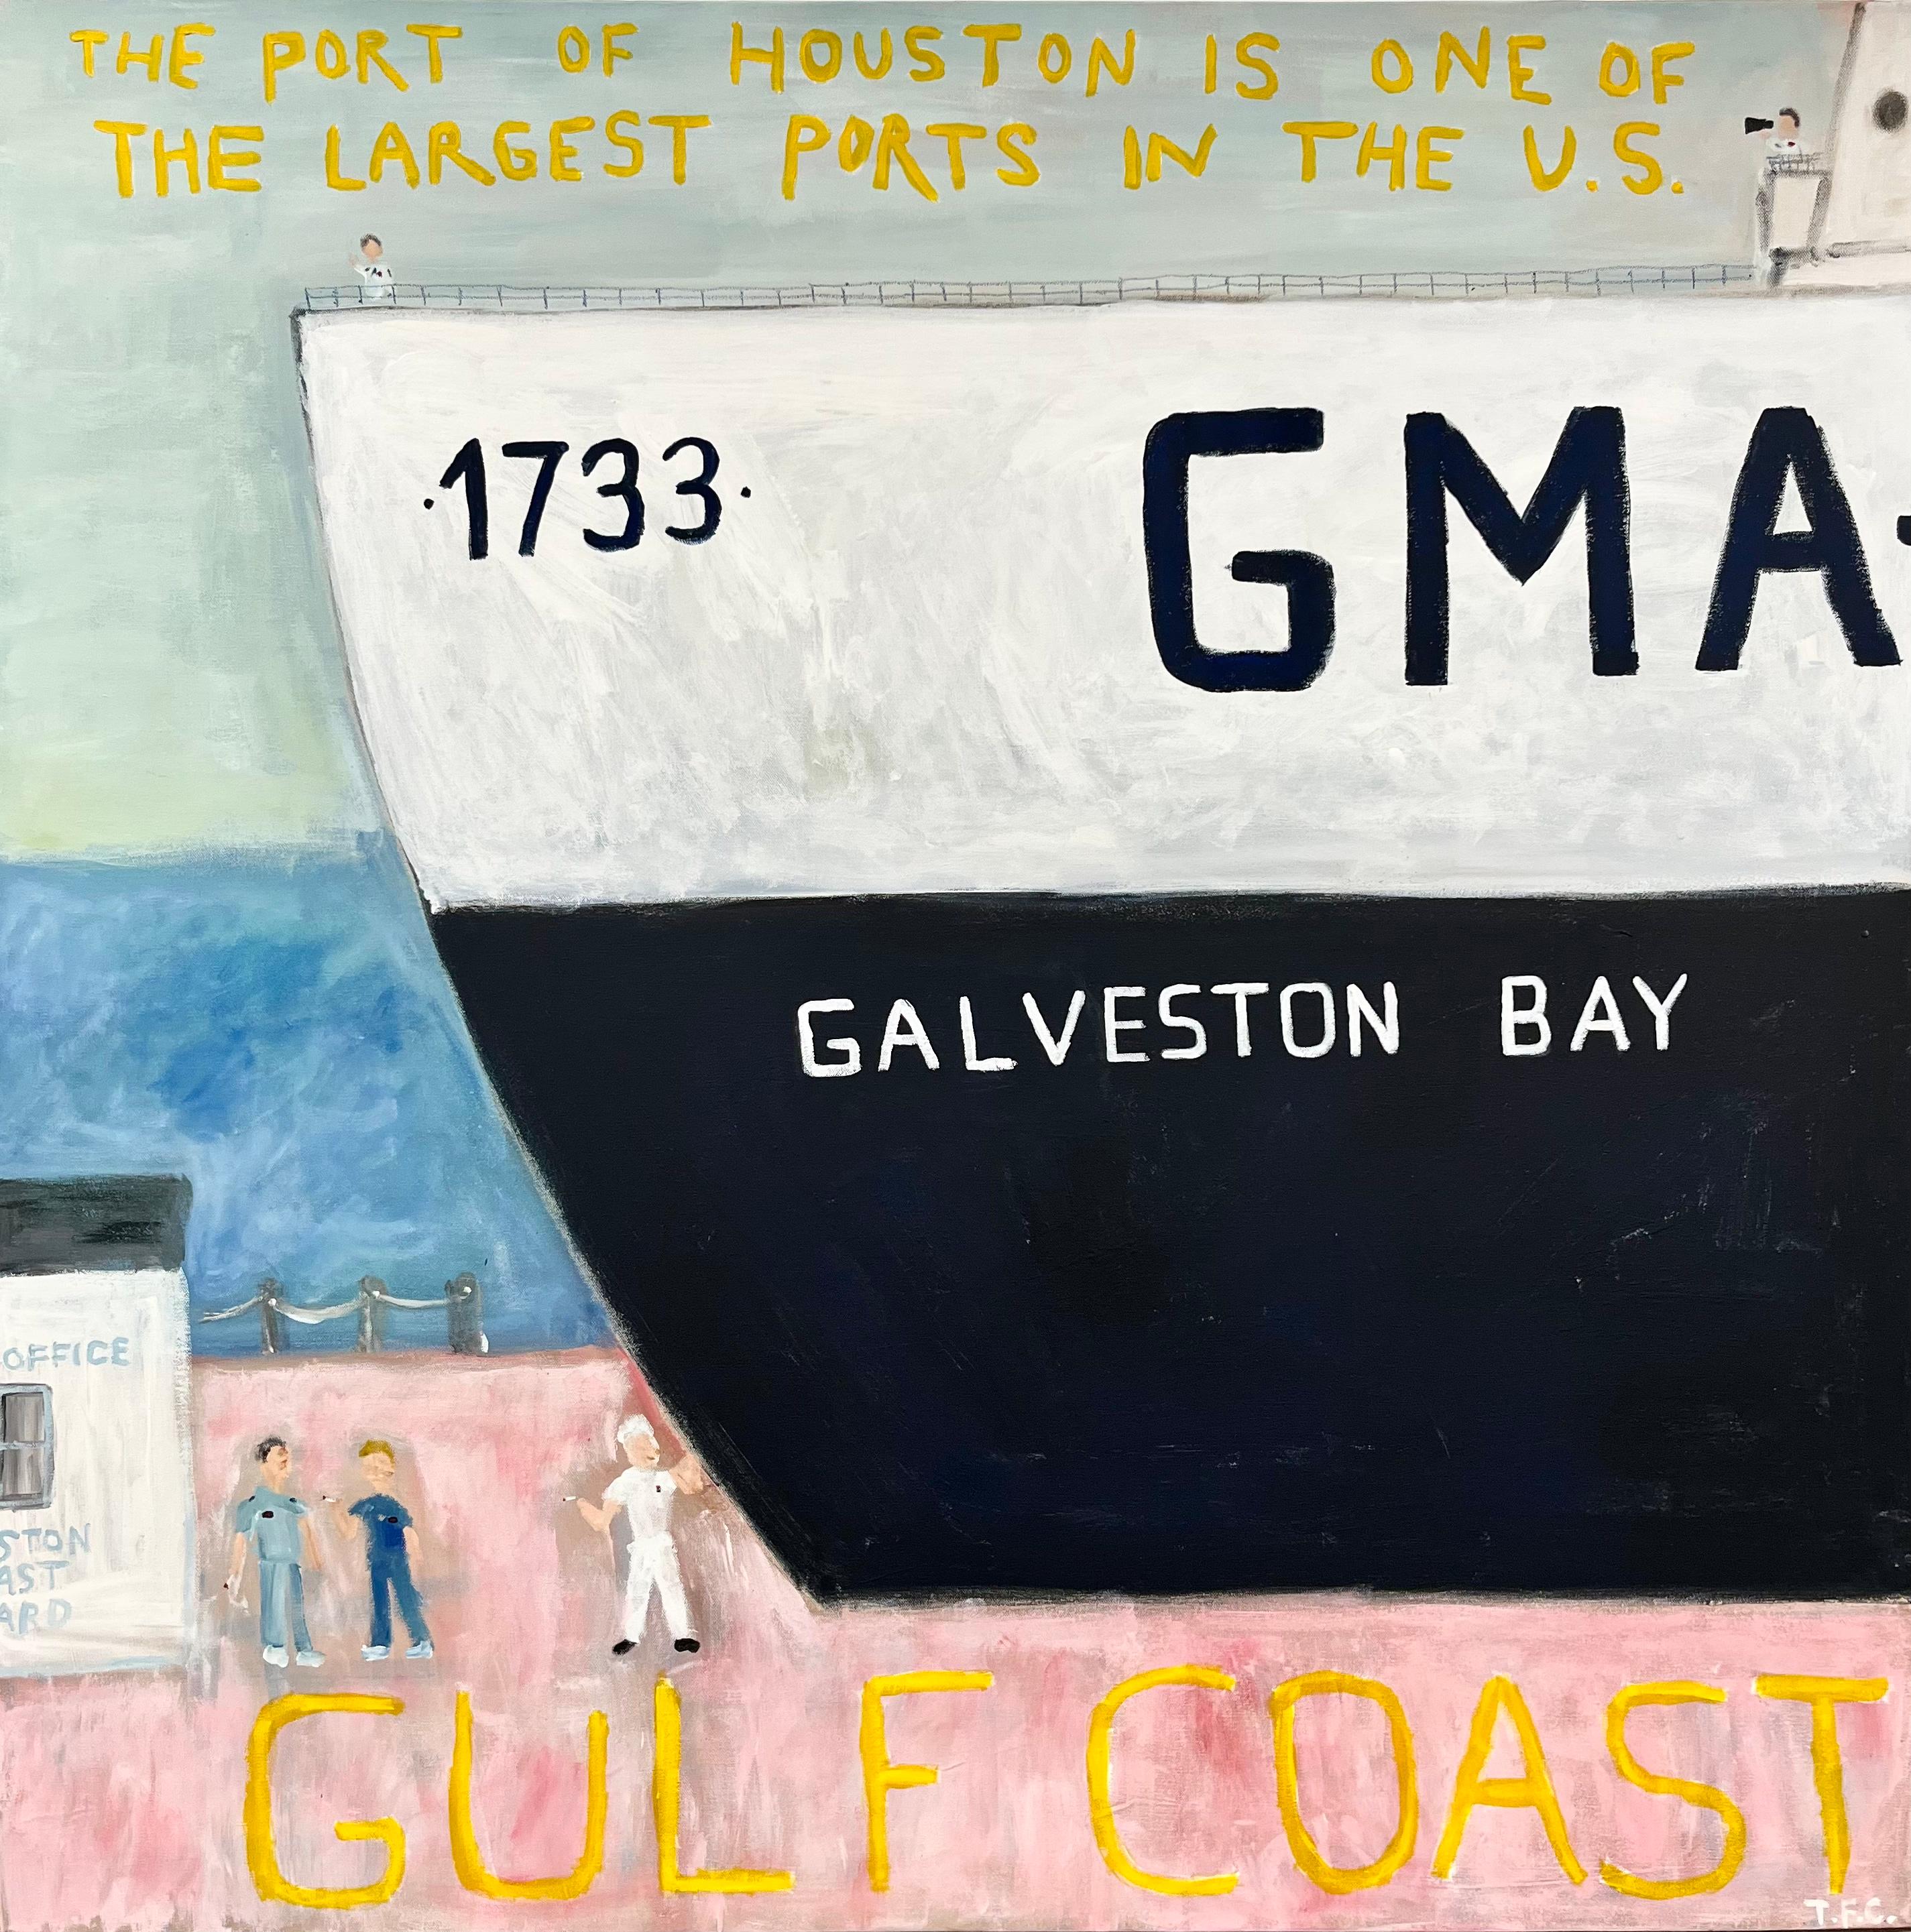 Tyler Casey Landscape Painting - "Gulf Coast" Contemporary Abstract Pop Art Nautical Painting of Galveston Bay